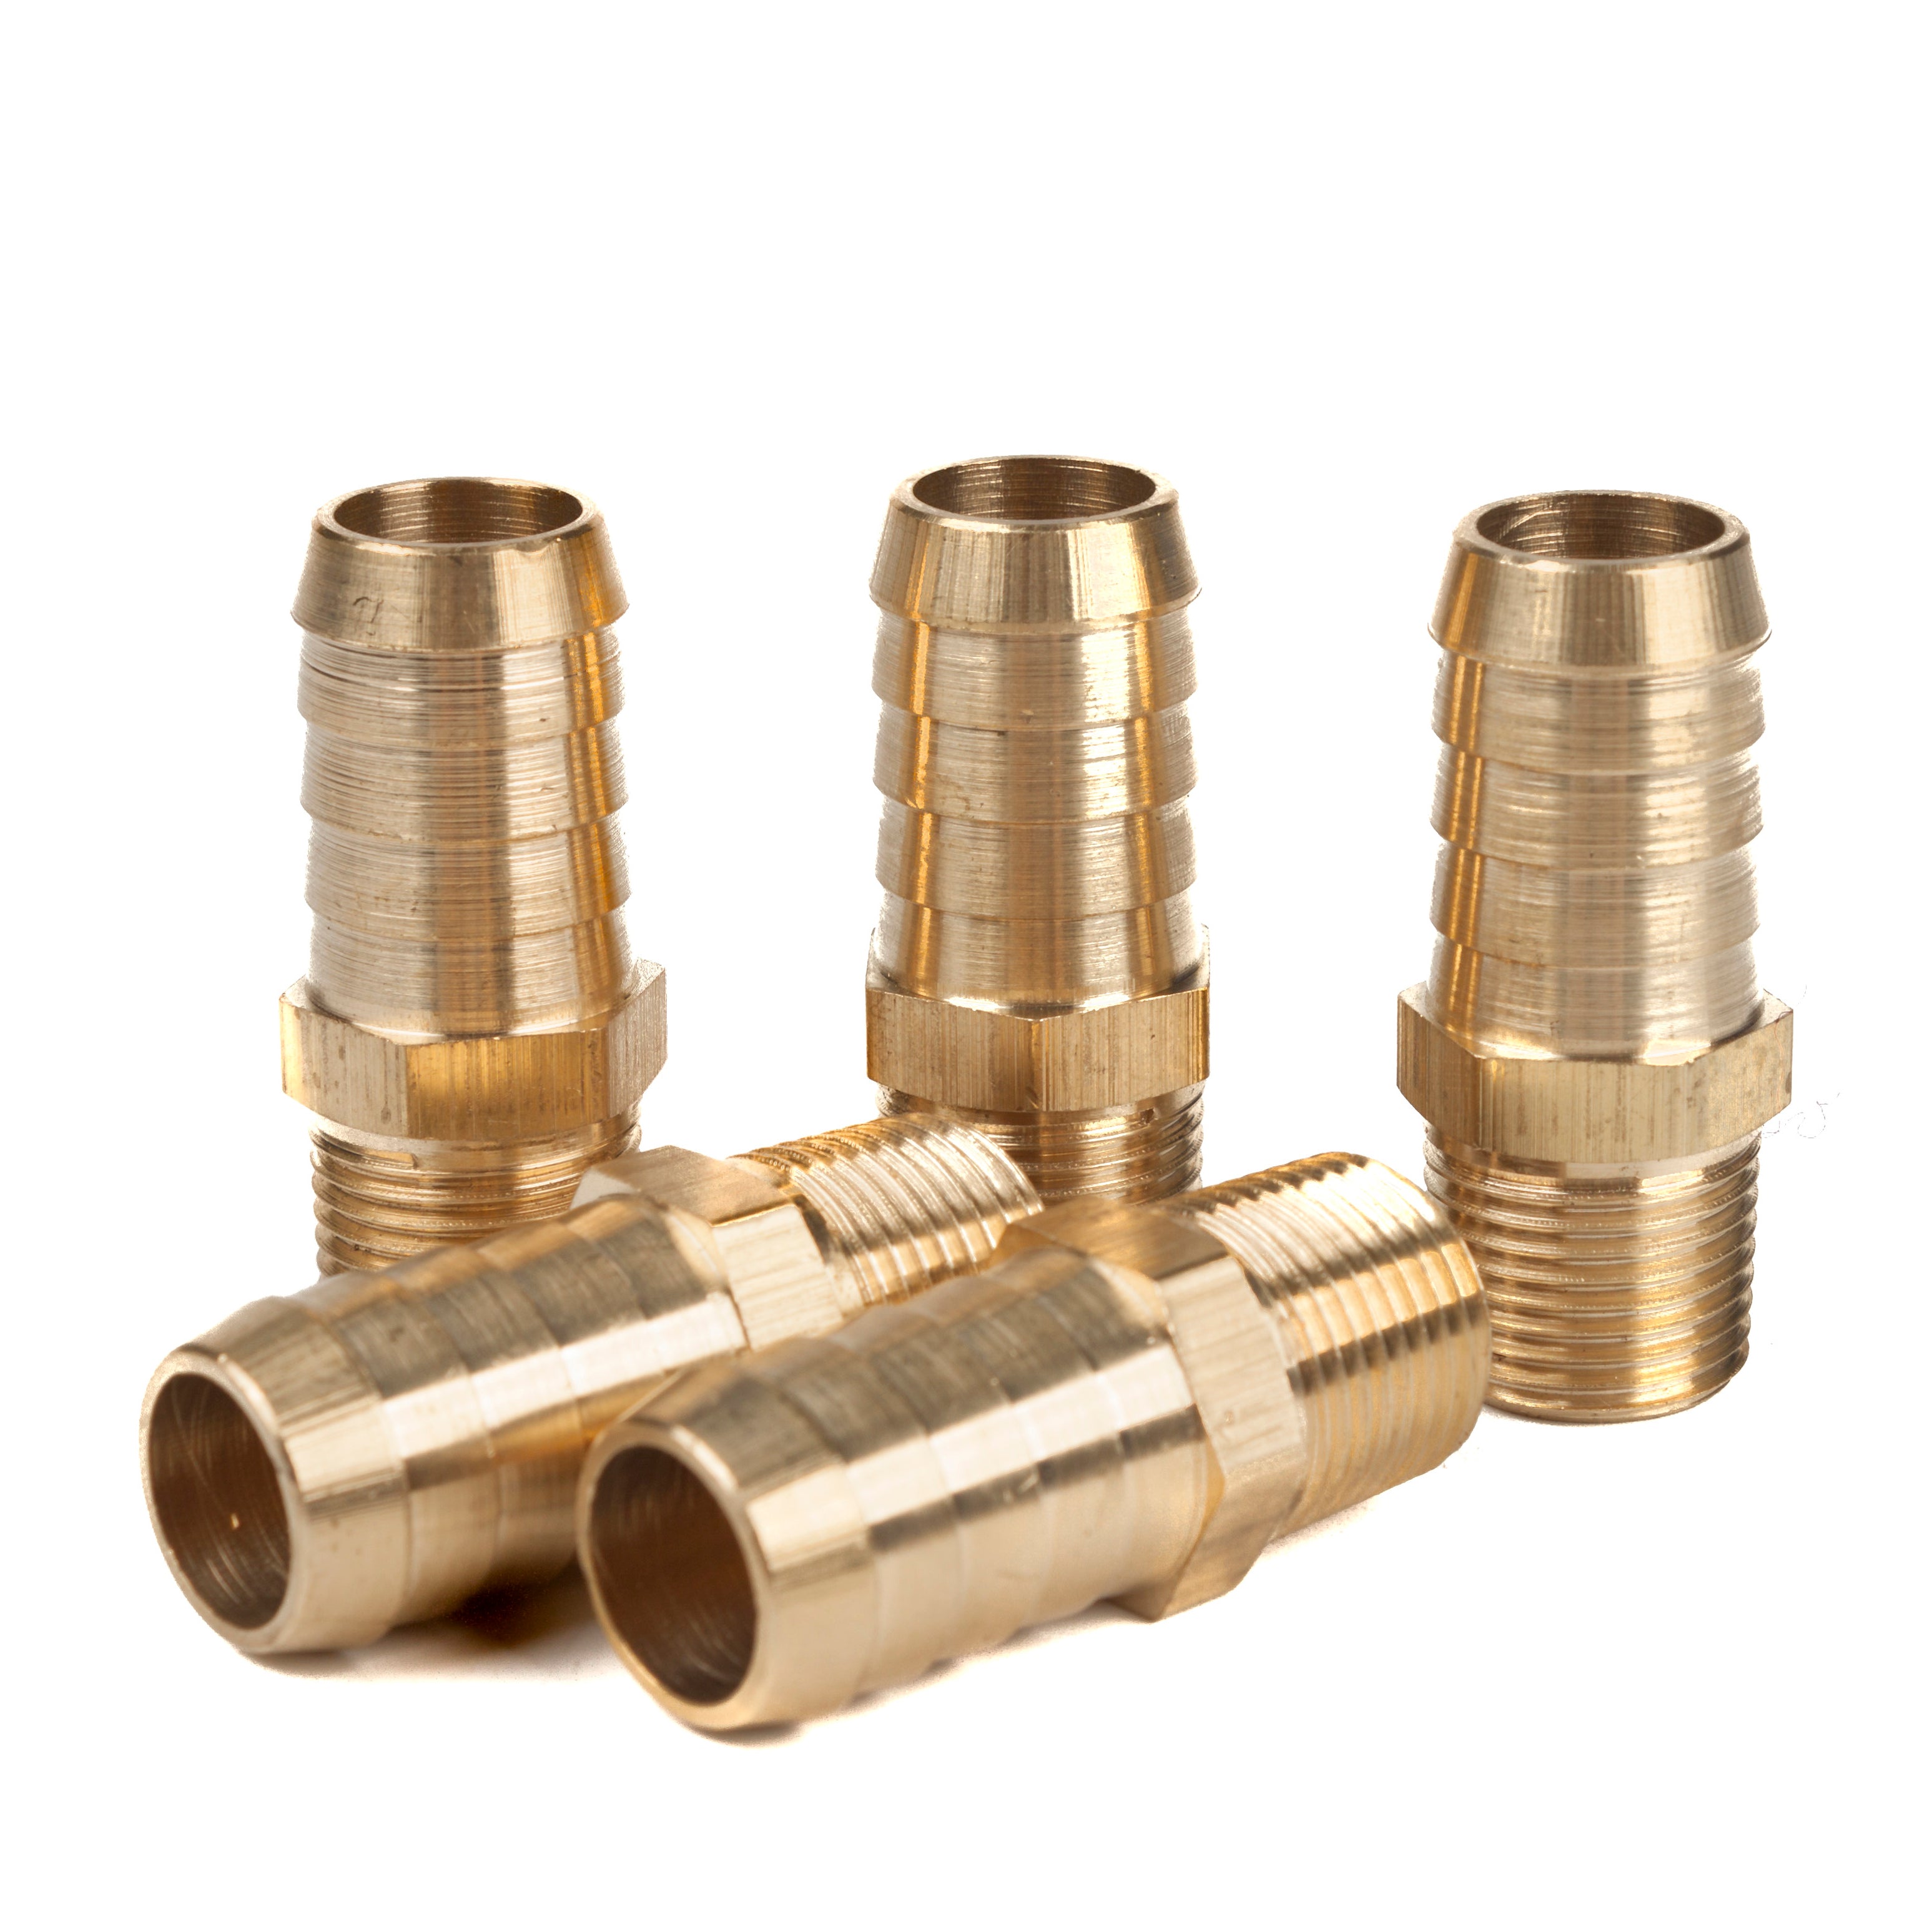 LTWFITTING Lead Free Brass Barbed Fitting Coupler/Connector 5/8 Inch Hose Barb x 3/8 Inch Male NPT Fuel Gas Water (Pack of 5)